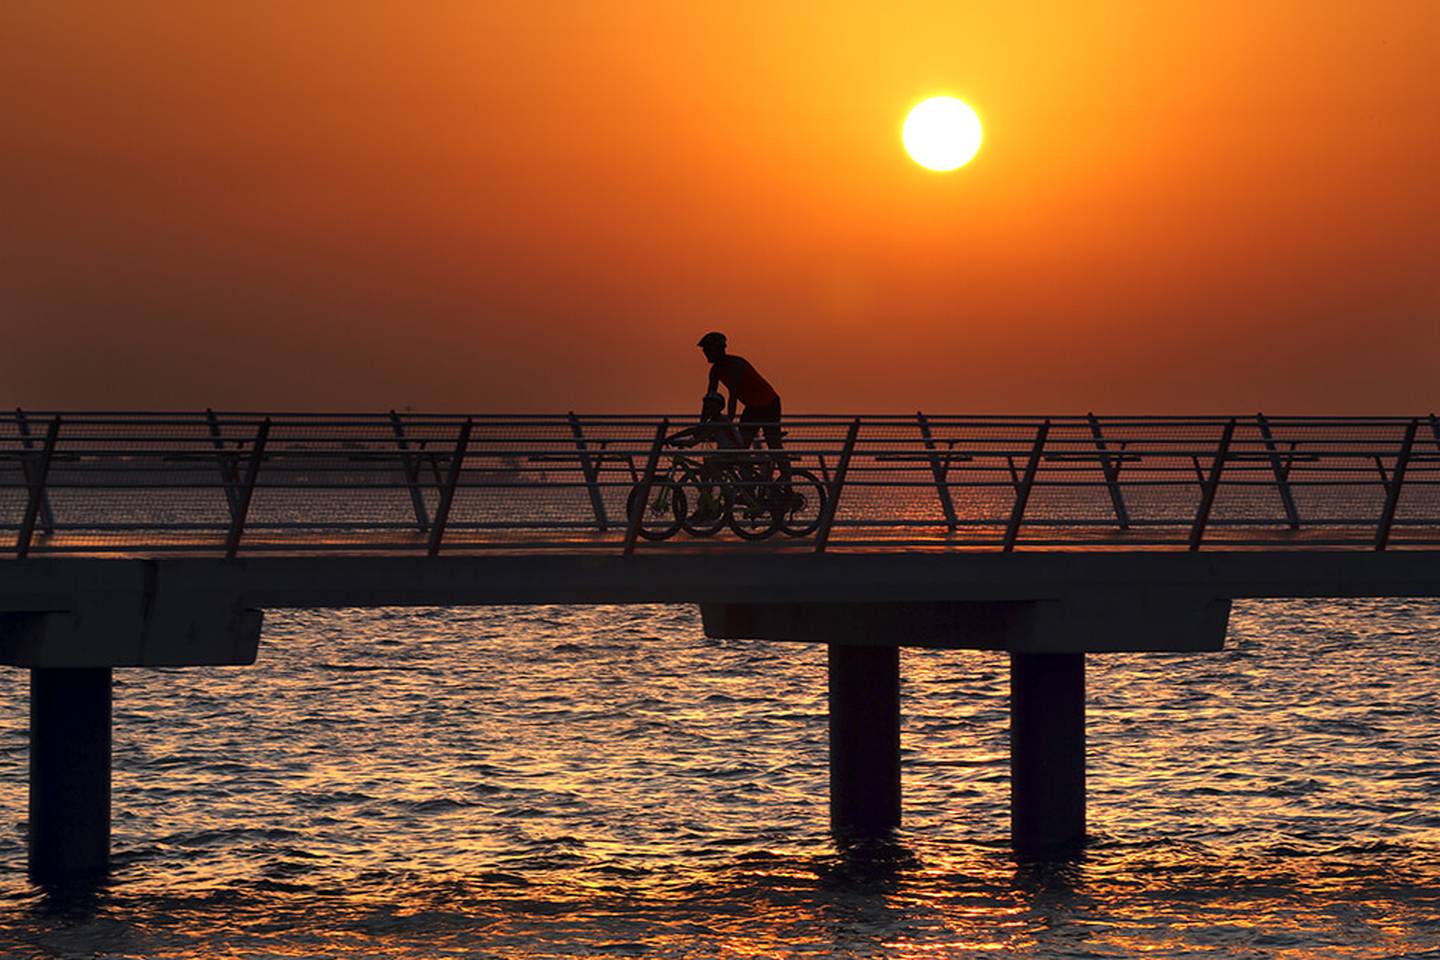 The park offers a cinematic biking experience against a sunset backdrop. Photo: Hudayriyat Island